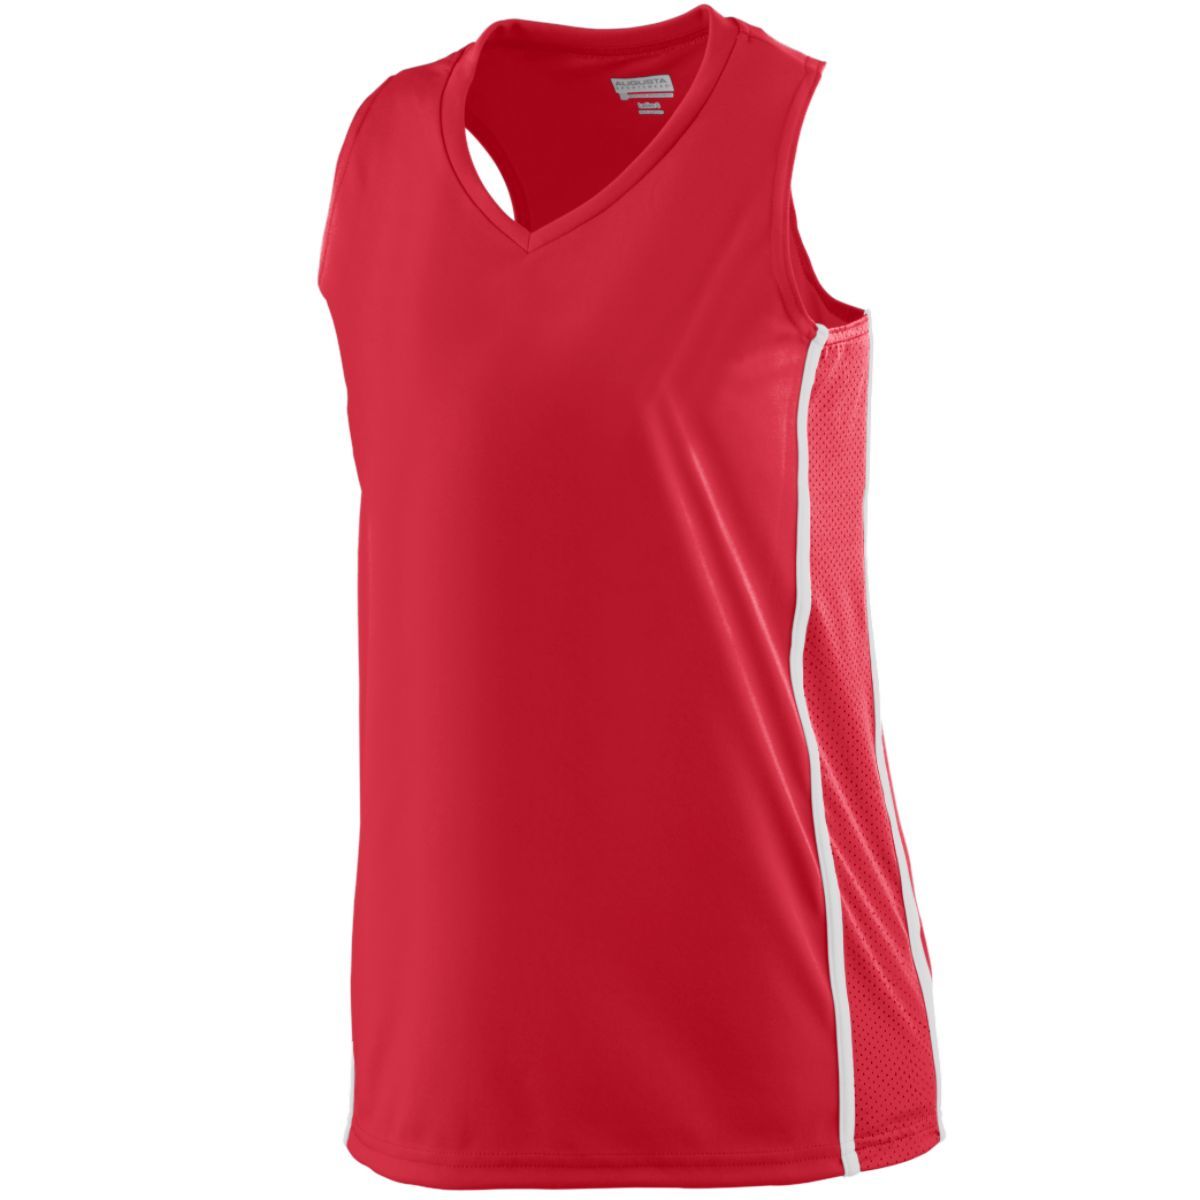 Augusta Sportswear Ladies Winning Streak Racerback Jersey in Red/White  -Part of the Ladies, Ladies-Jersey, Augusta-Products, Basketball, Shirts, All-Sports, All-Sports-1 product lines at KanaleyCreations.com